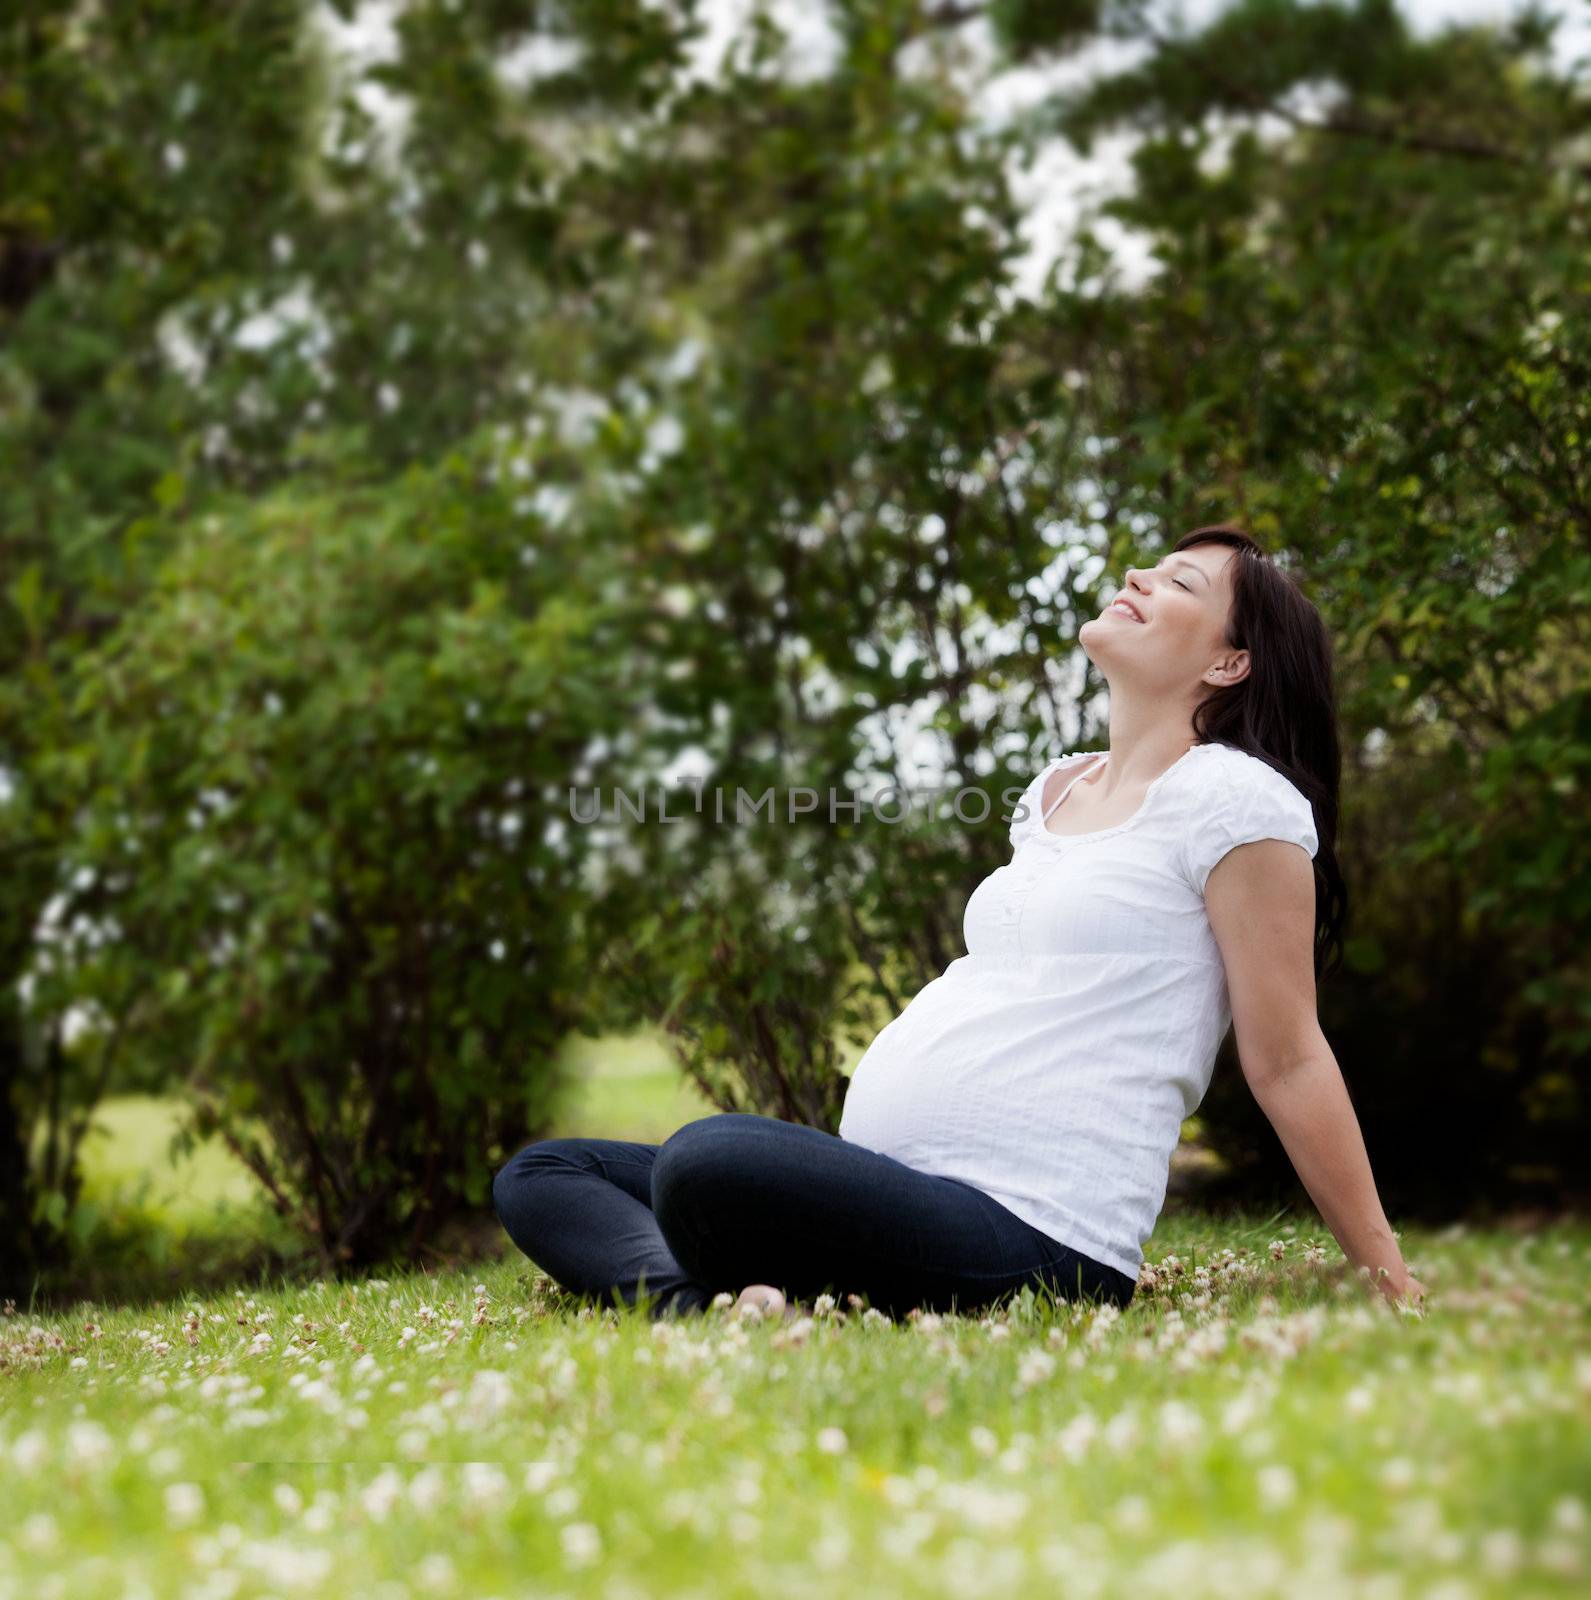 Pregnant Woman in Park by leaf